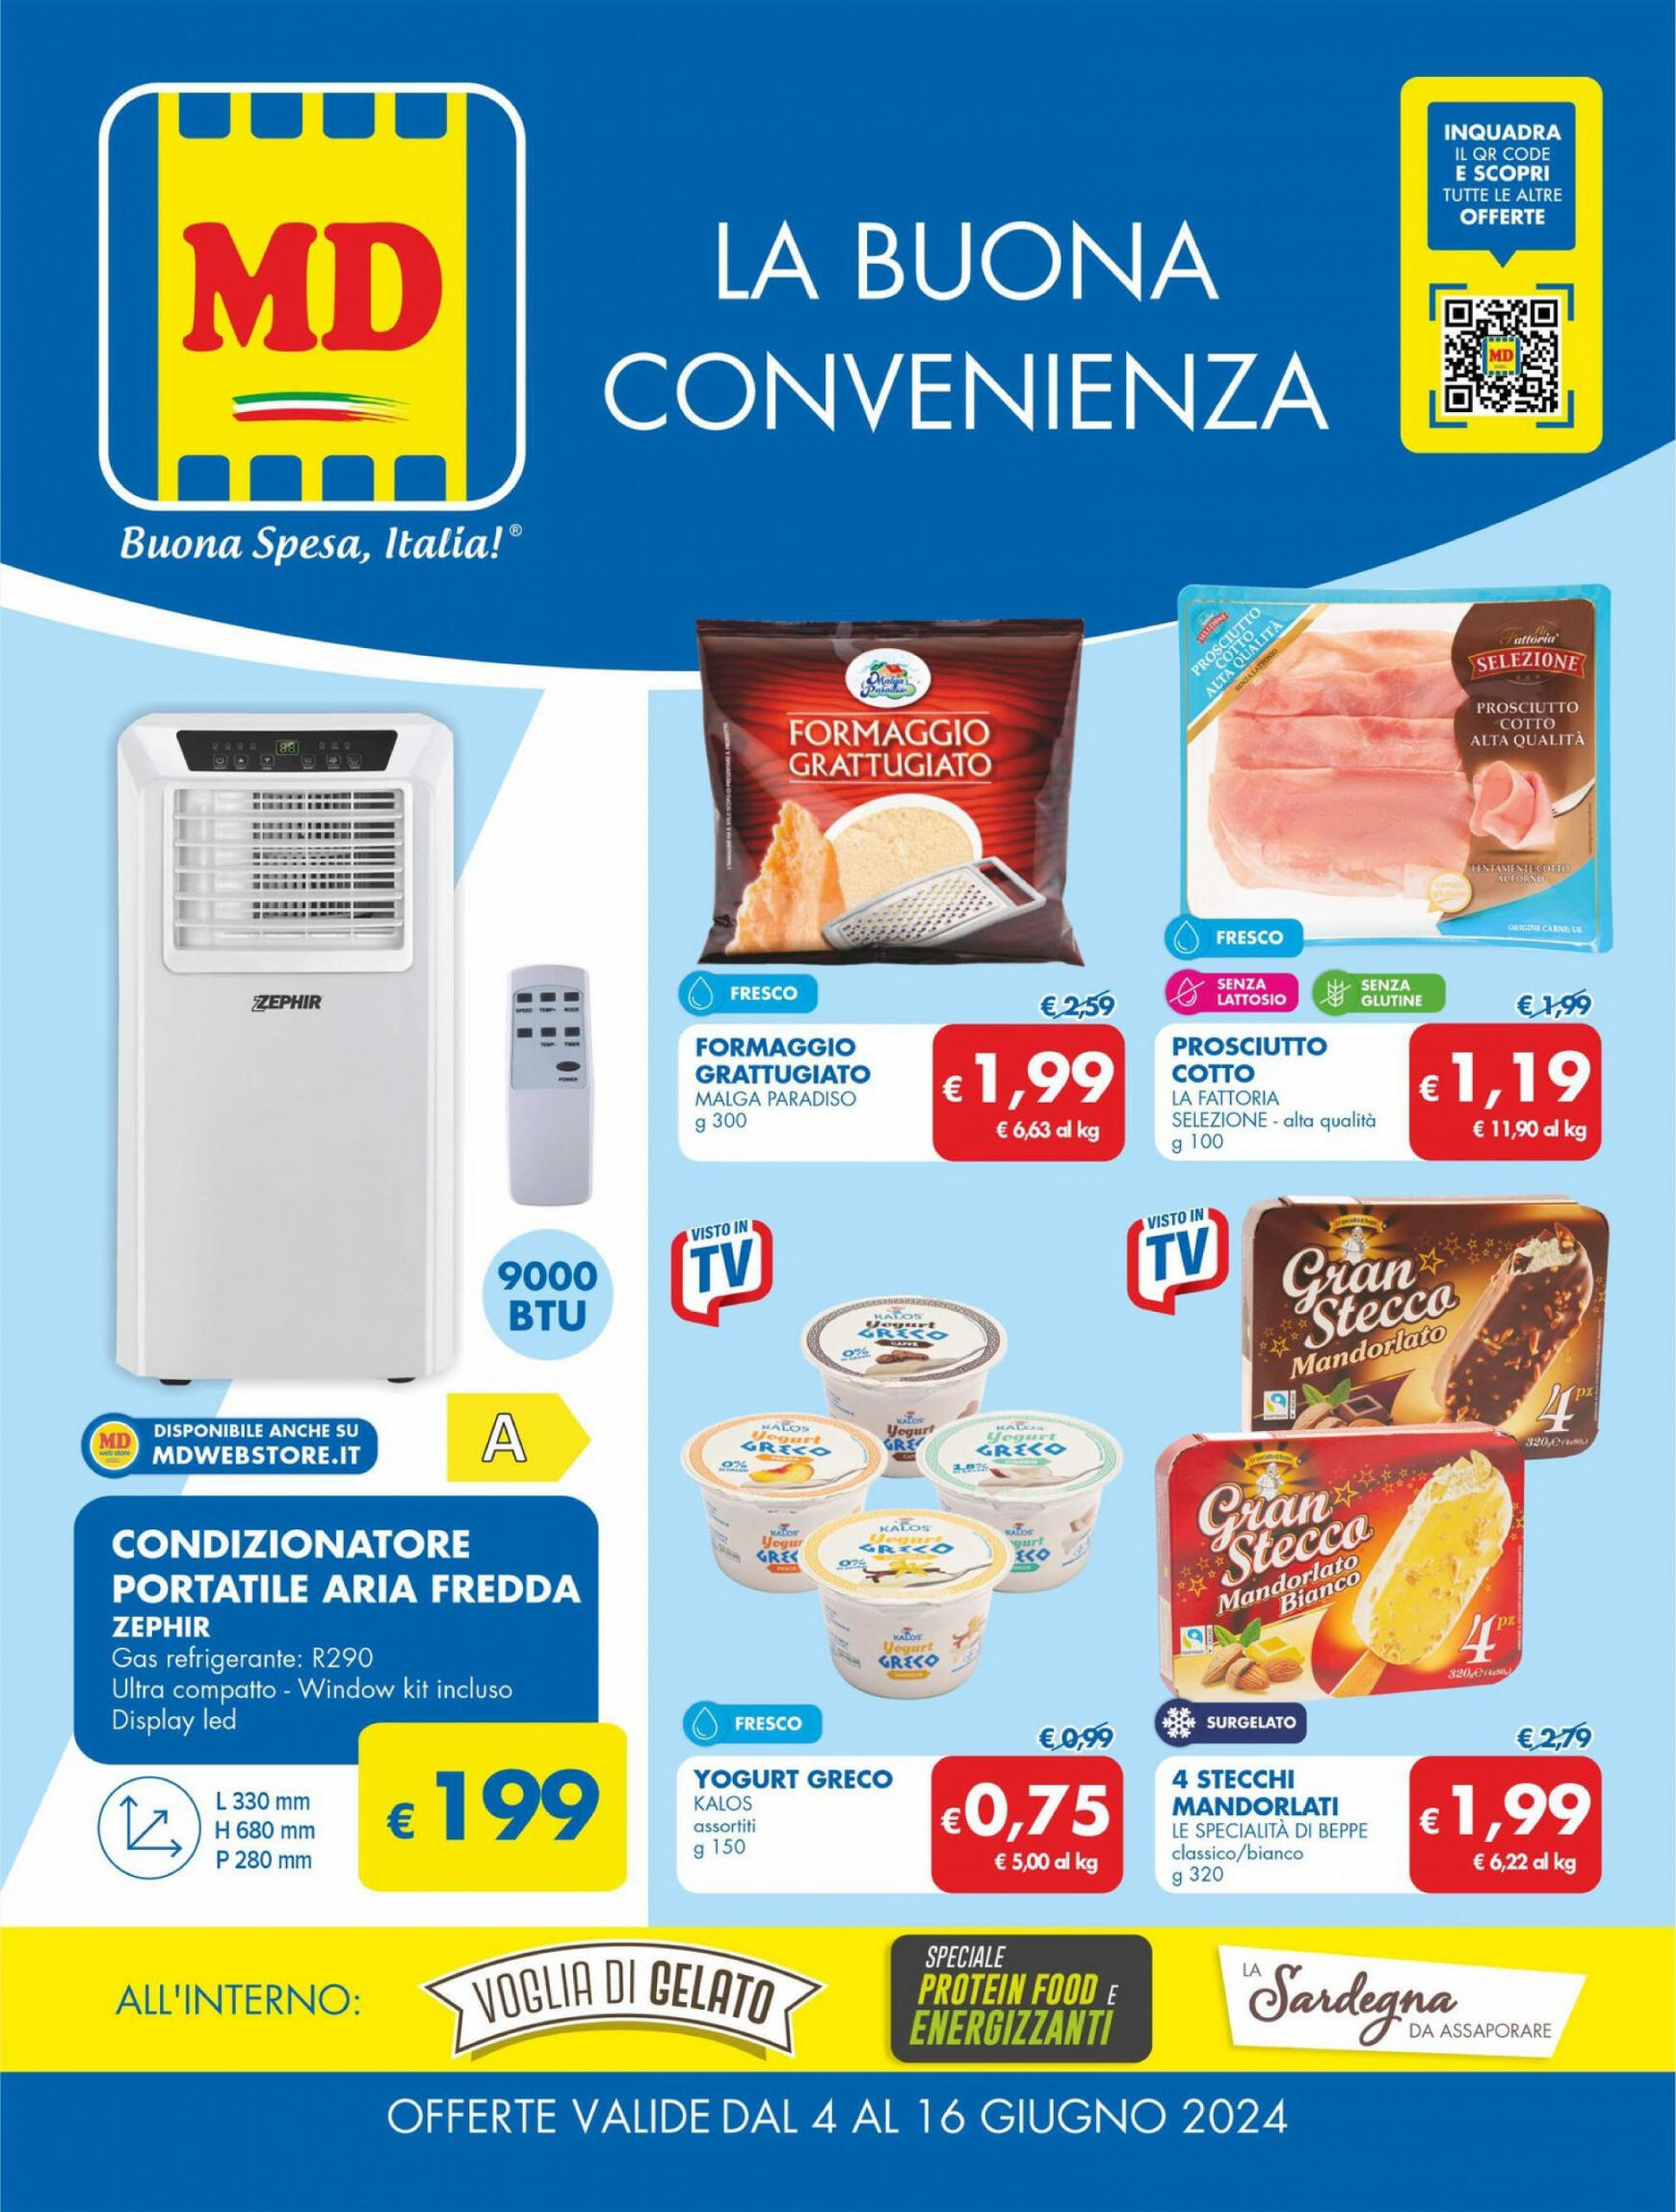 md-discount - Nuovo volantino MD 04.06. - 16.06. - page: 1